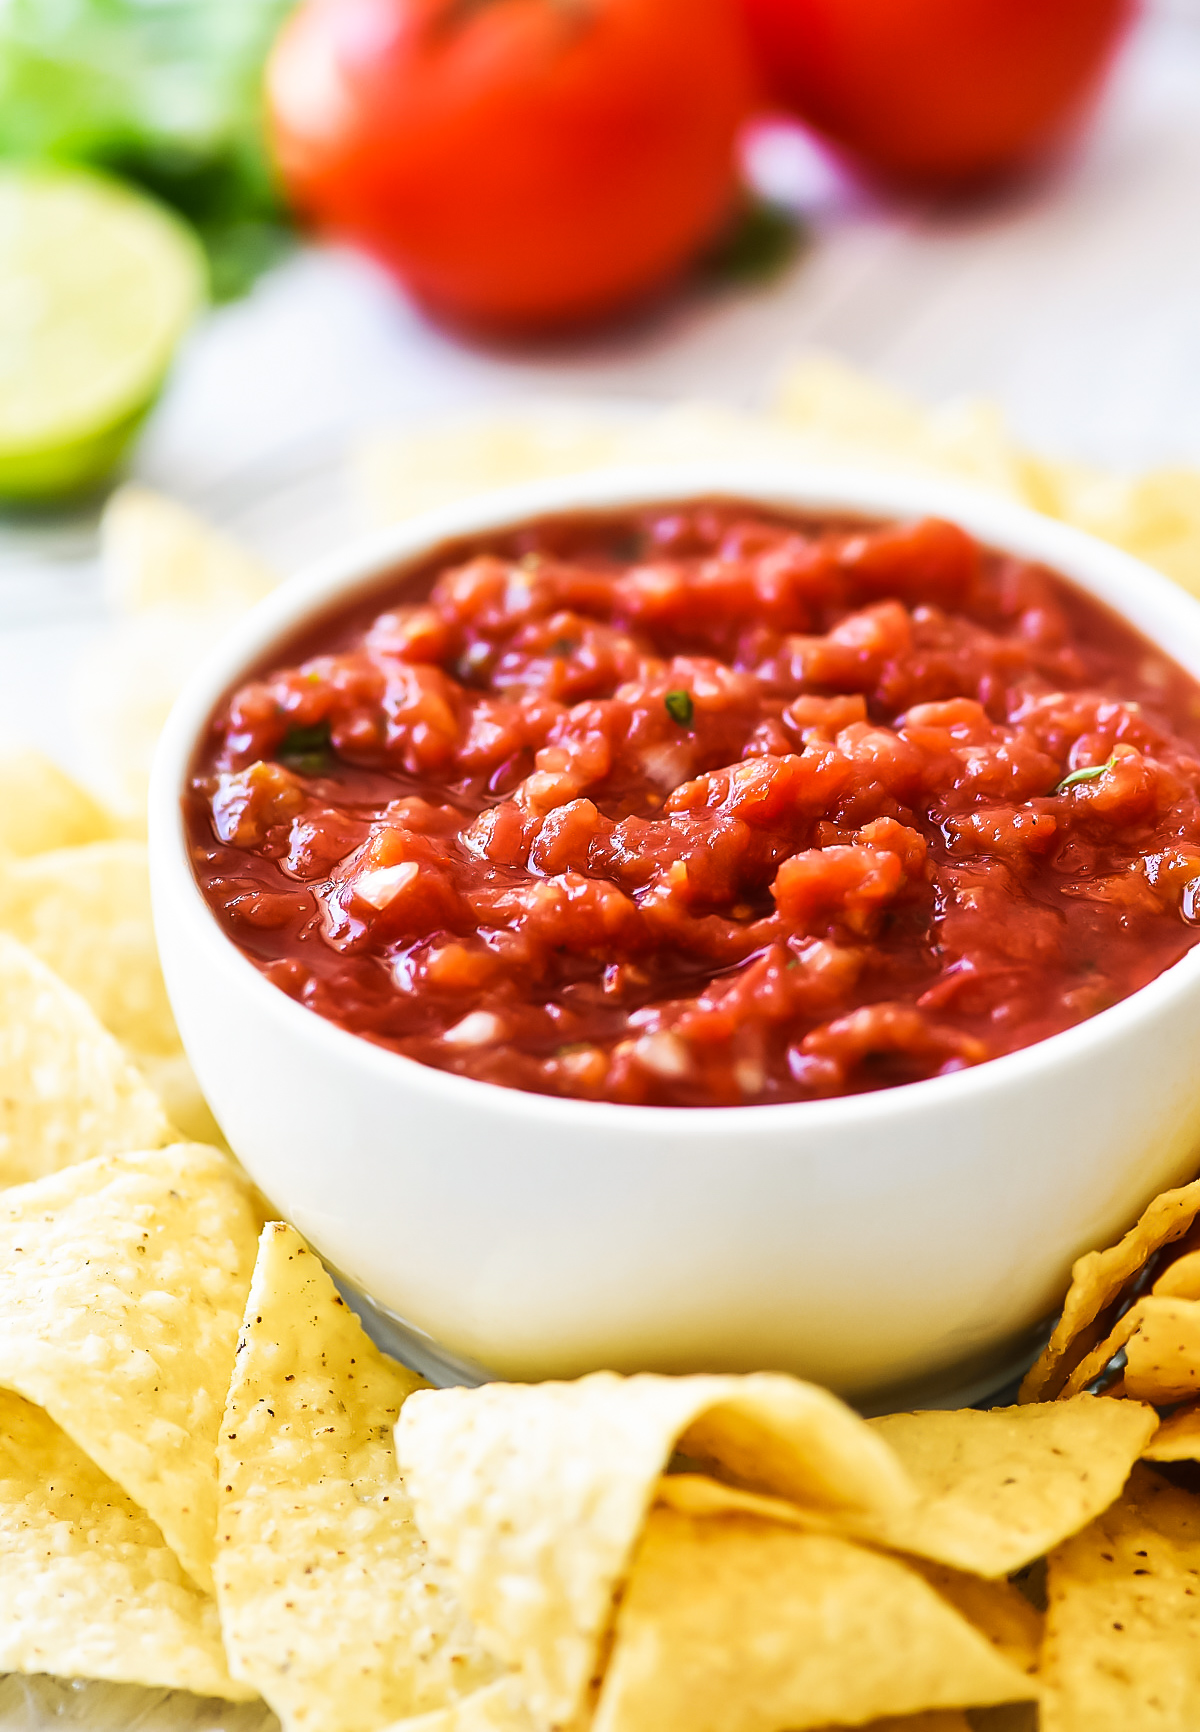 You can have restaurant quality salsa in no time with this amazing Homemade Salsa recipe. It’s refreshing, colorful and bursting with flavor. Life-in-the-Lofthouse.com